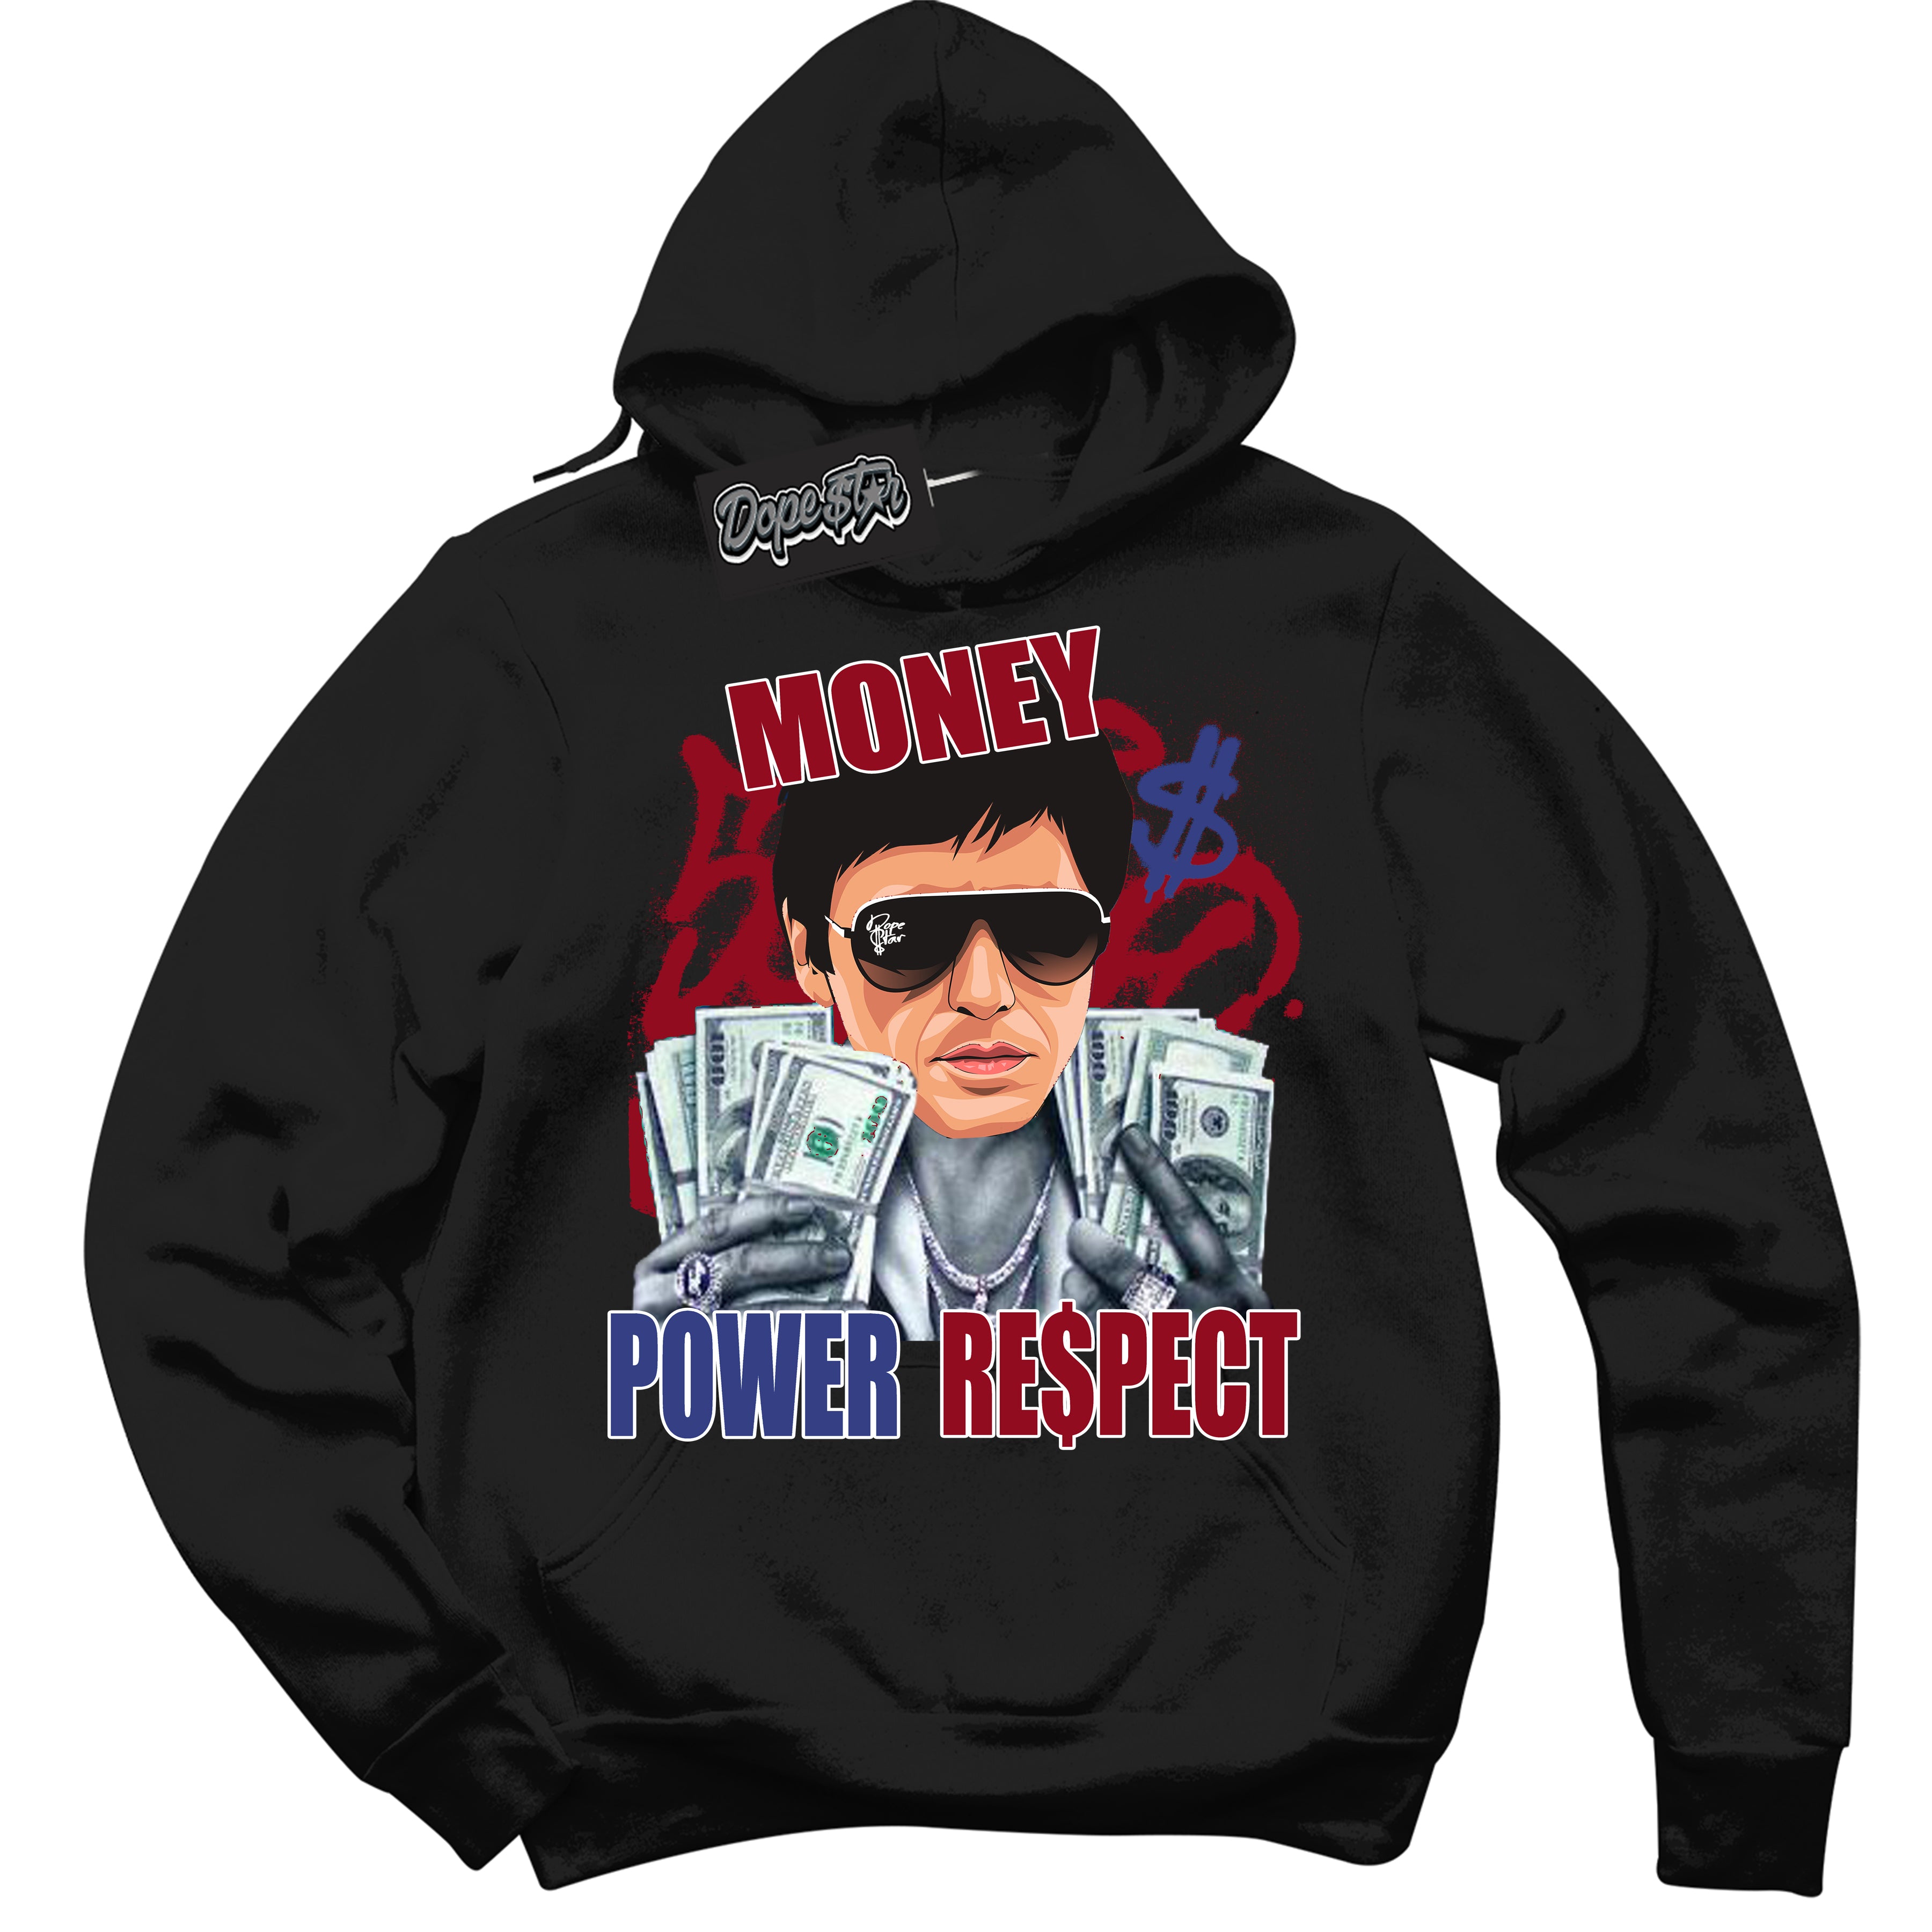 Cool Black Hoodie with “ Tony Montana ”  design that Perfectly Matches Playoffs 8s Sneakers.